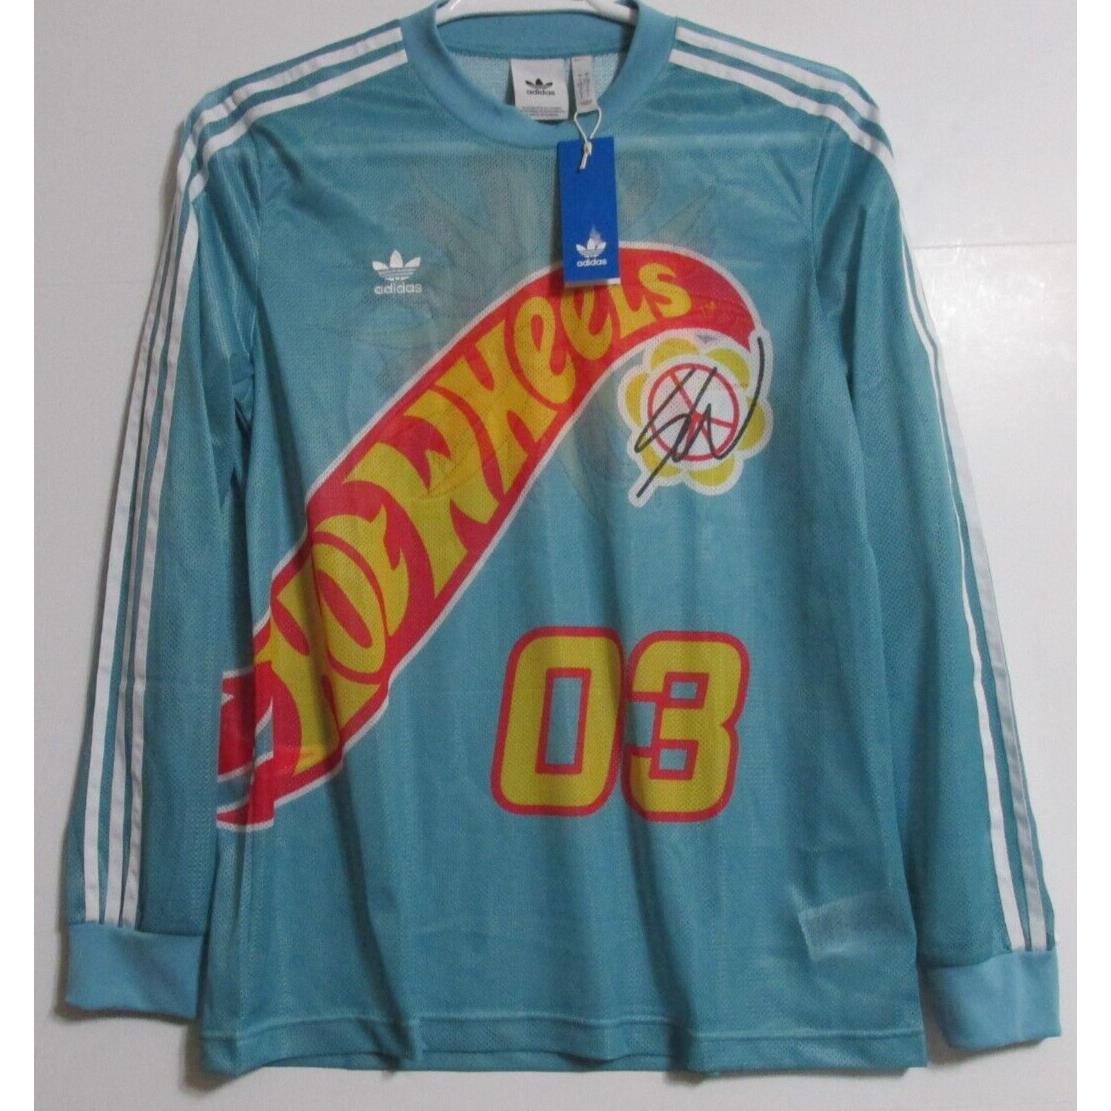 Men`s Adidas Originals Sean Wotherspoon x Hot Wheels Jersey Size Large